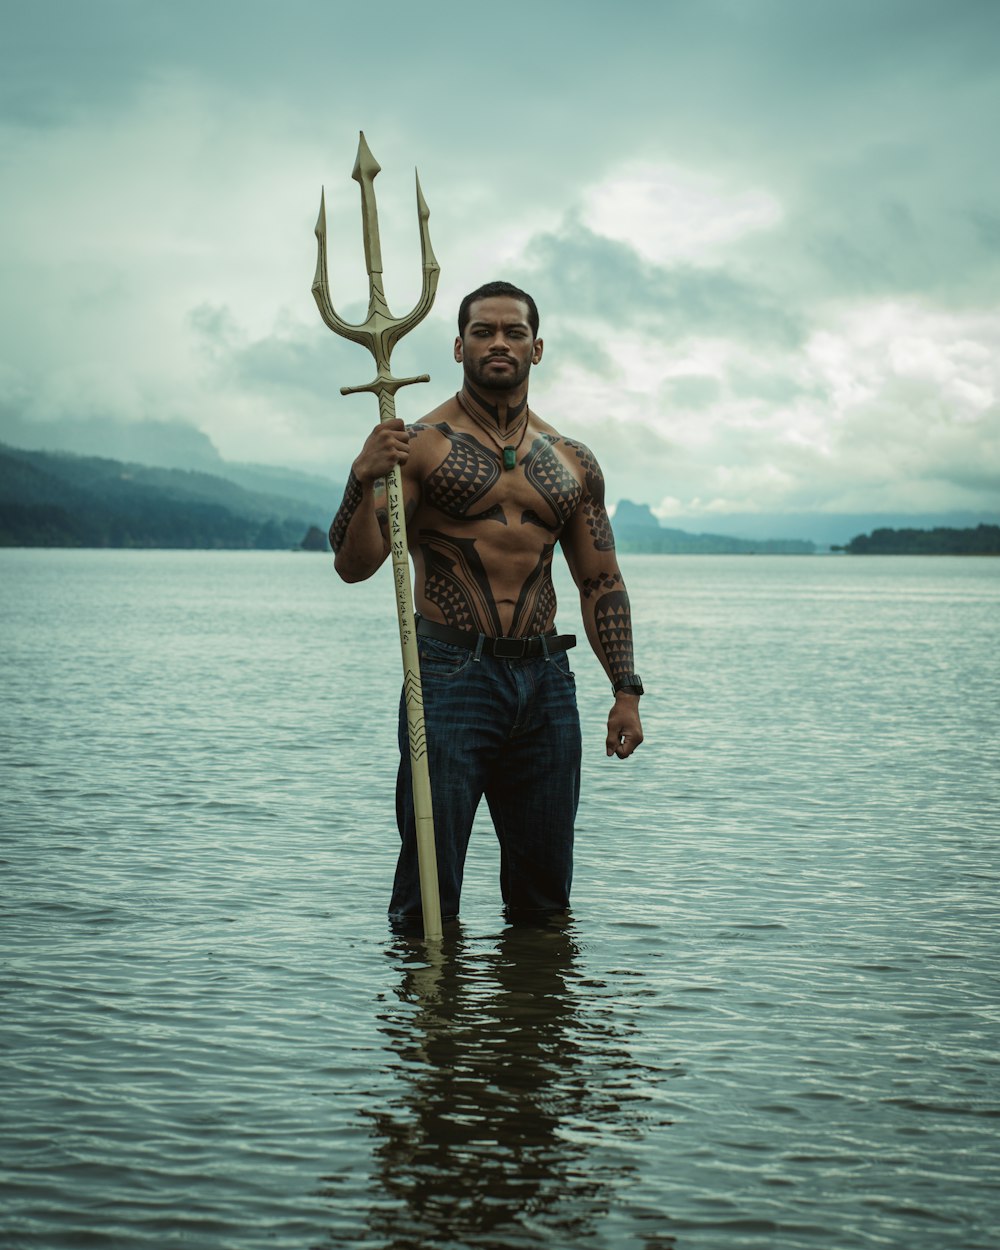 a man standing in a body of water holding a pole